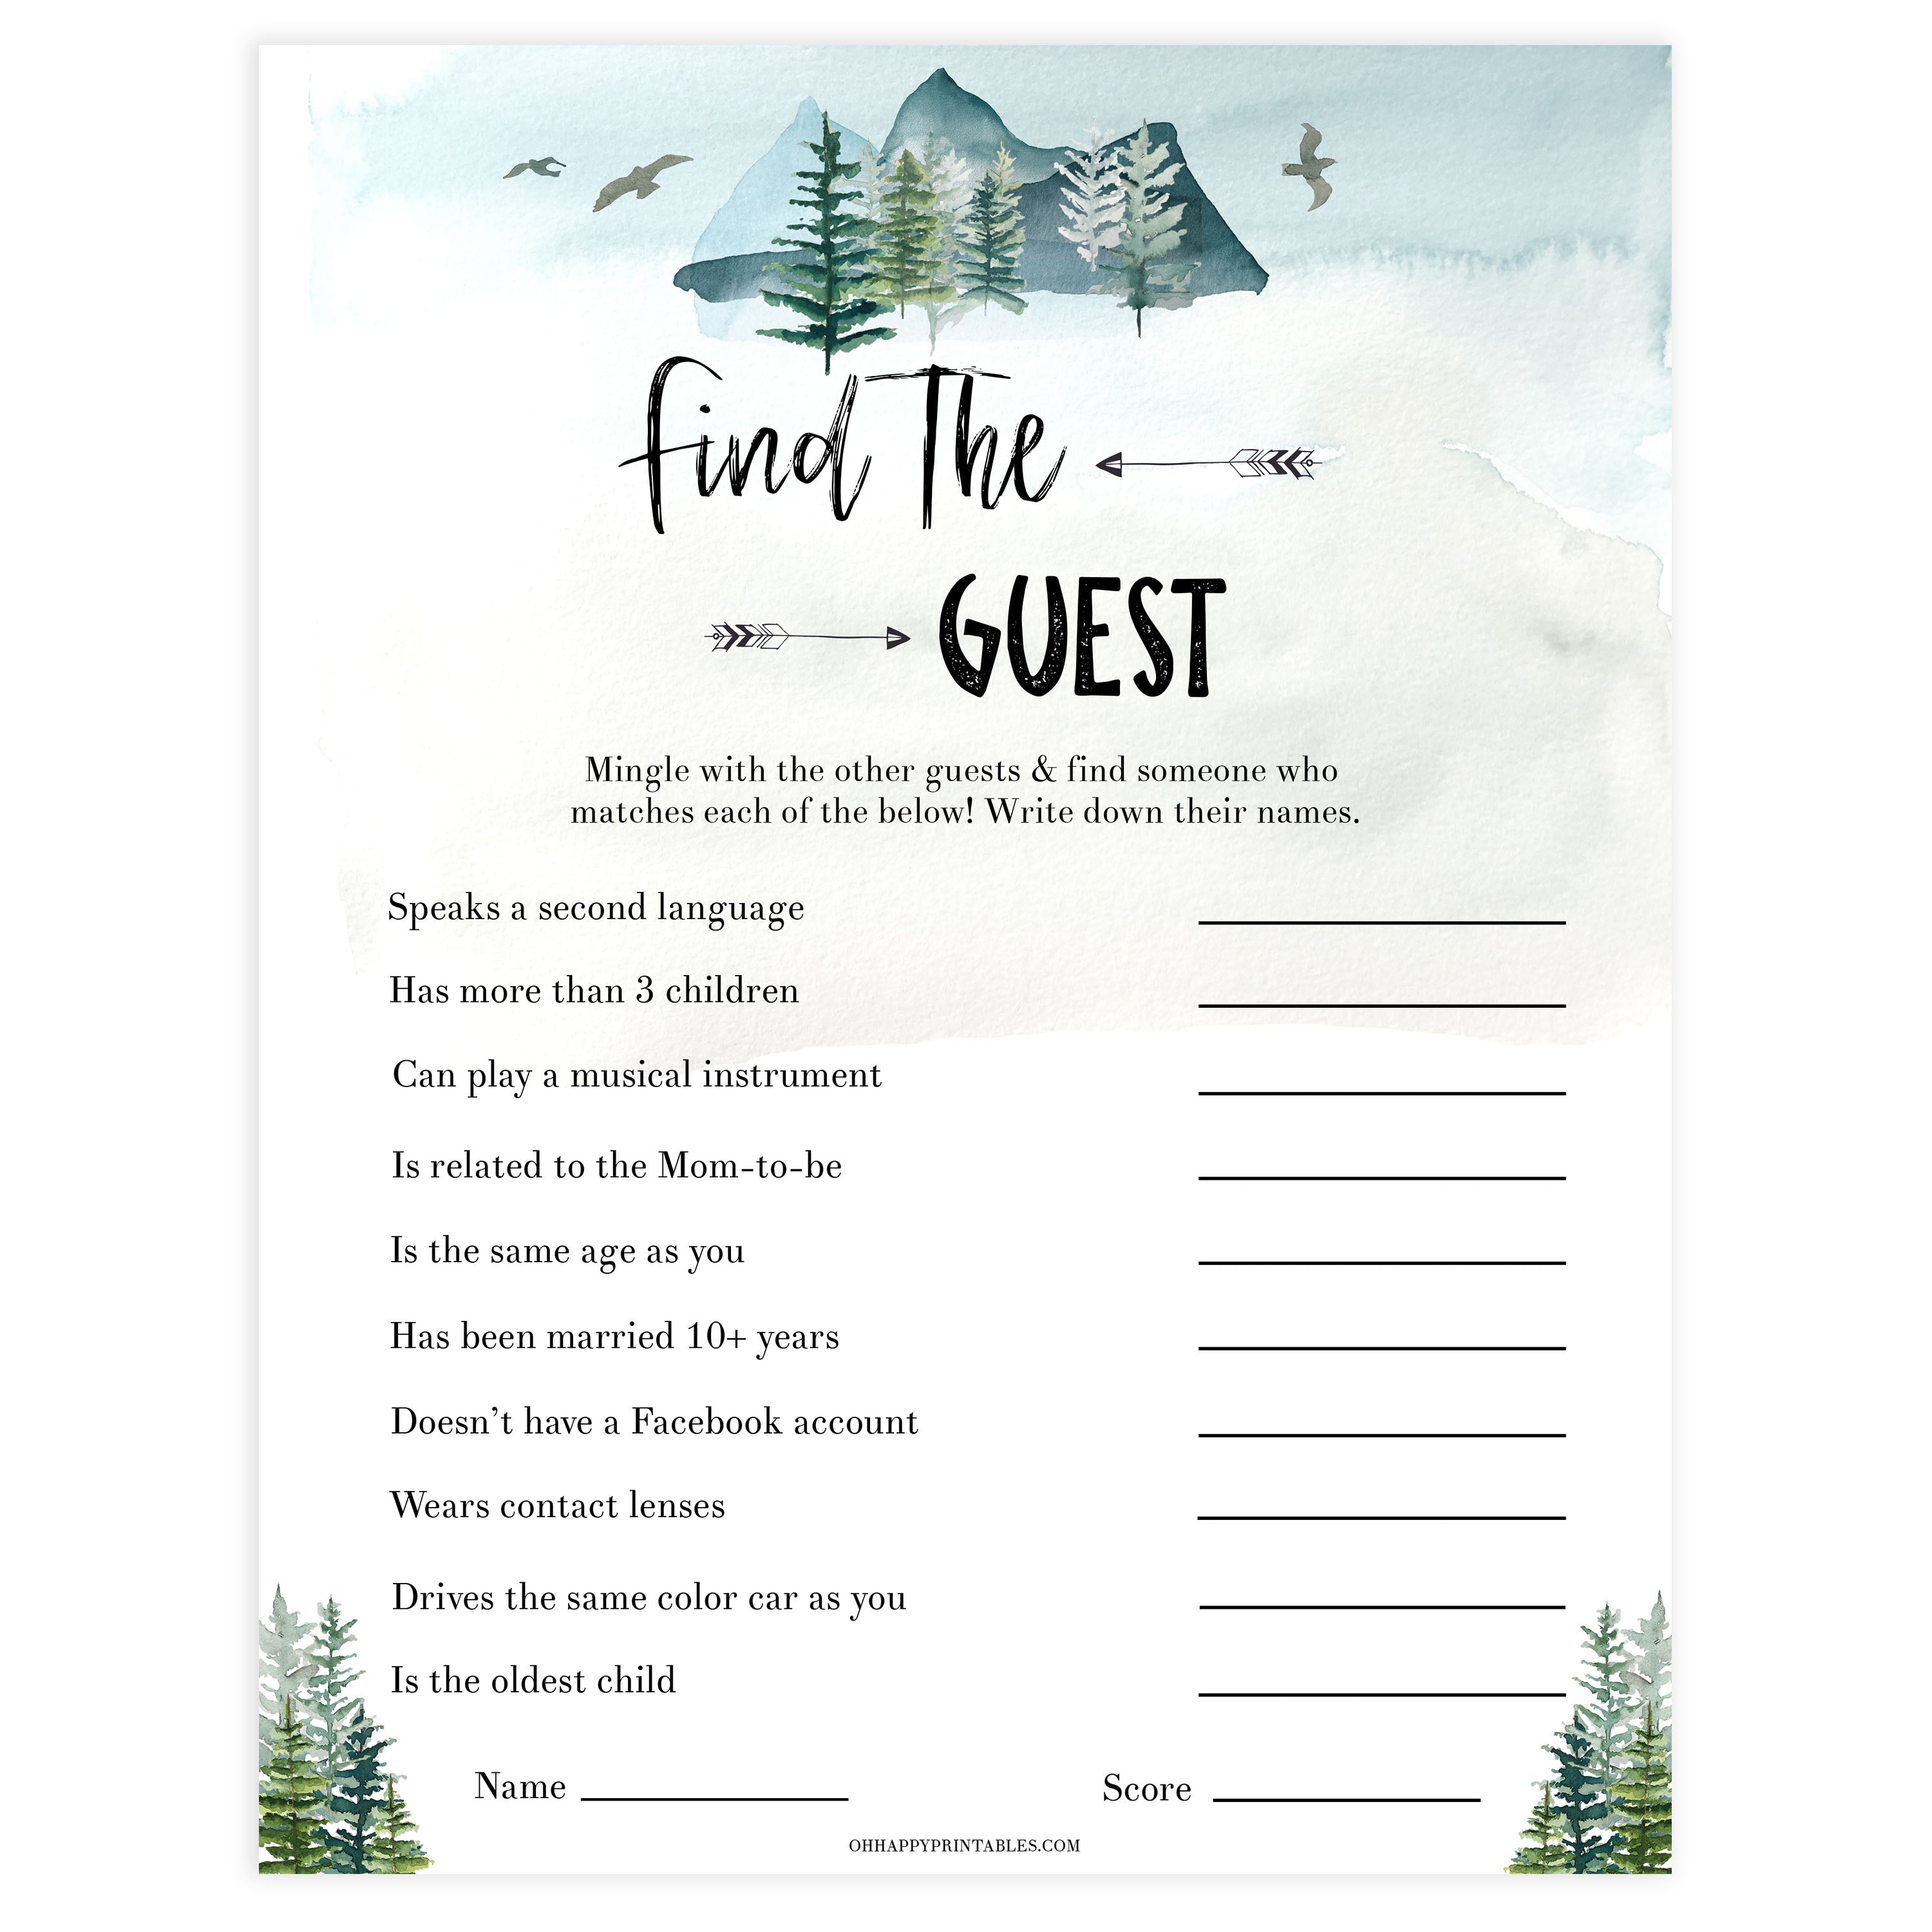 Editable find the guest baby game, Printable baby shower games, adventure awaits baby games, baby shower games, fun baby shower ideas, top baby shower ideas, adventure awaits baby shower, baby shower games, fun adventure baby shower ideas